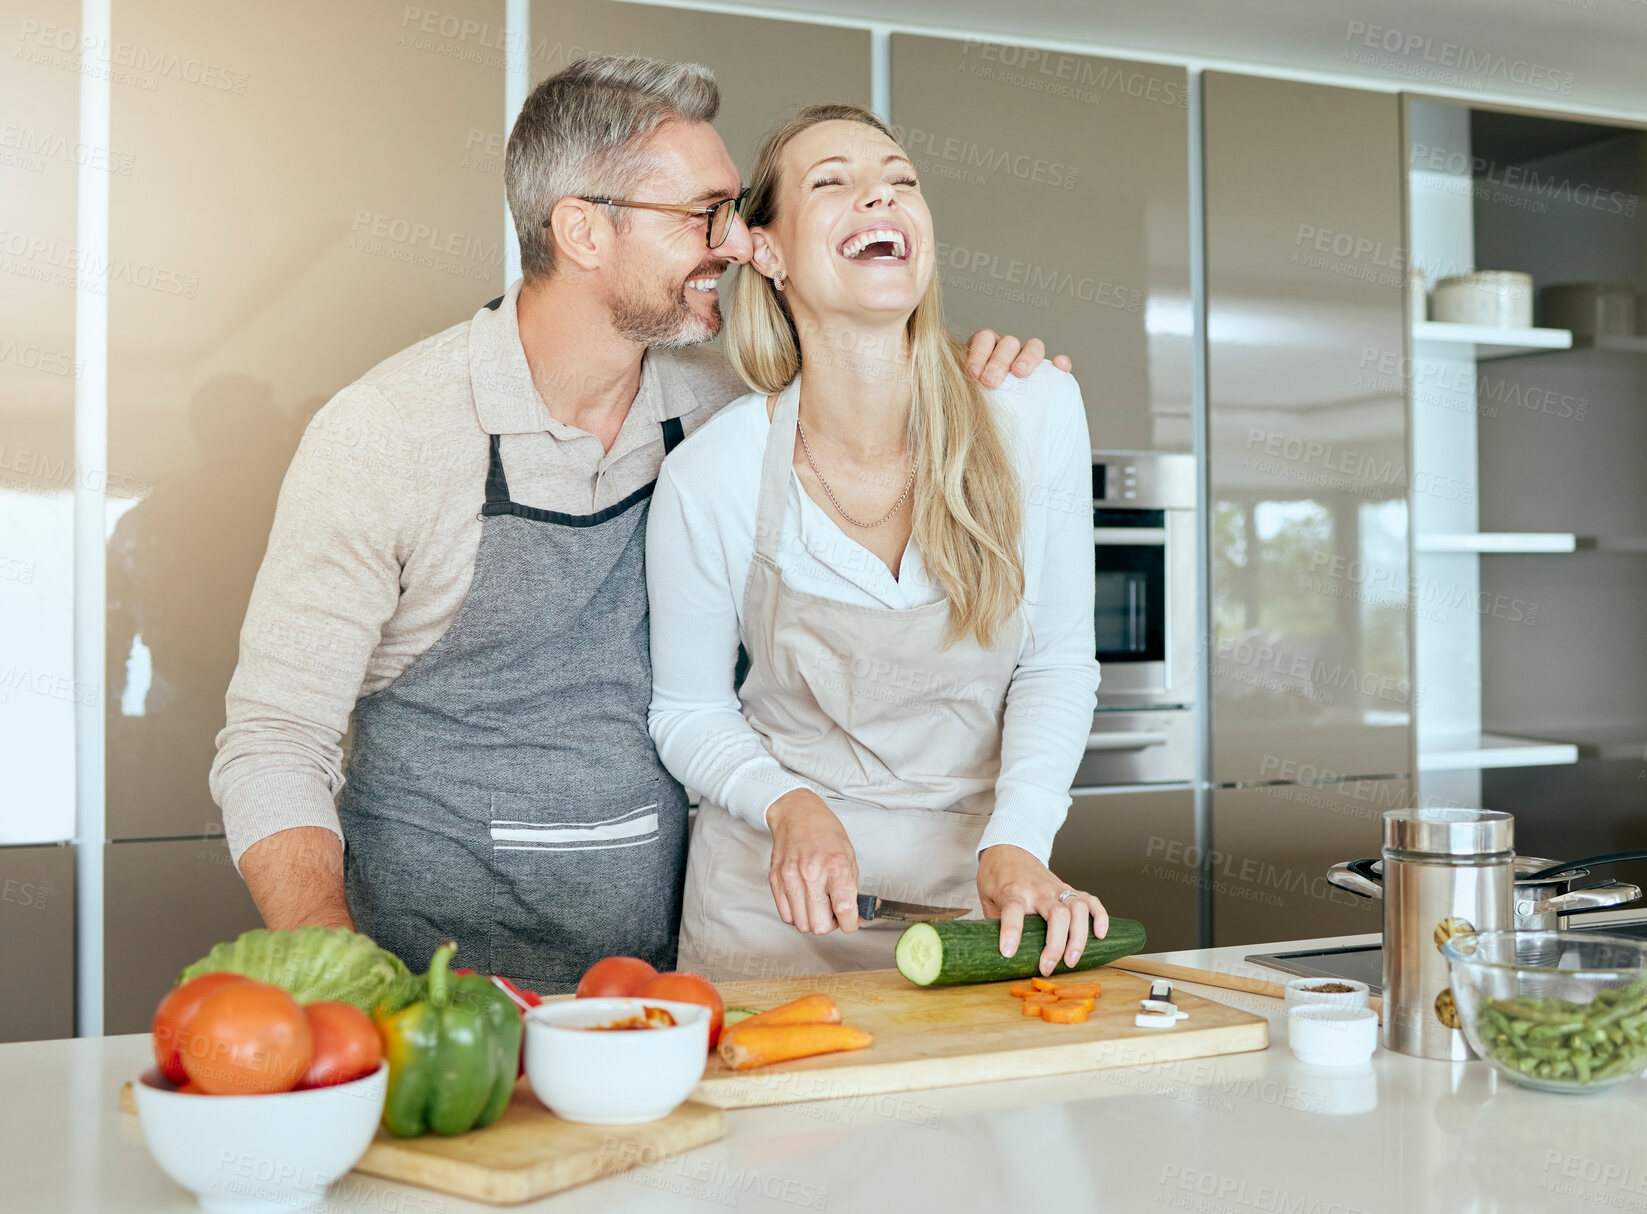 Buy stock photo Couple in kitchen cooking together in their home, having fun and laughing. Middle aged man and woman cutting healthy vegetables and making food in their house. Smiling, happy and in love people